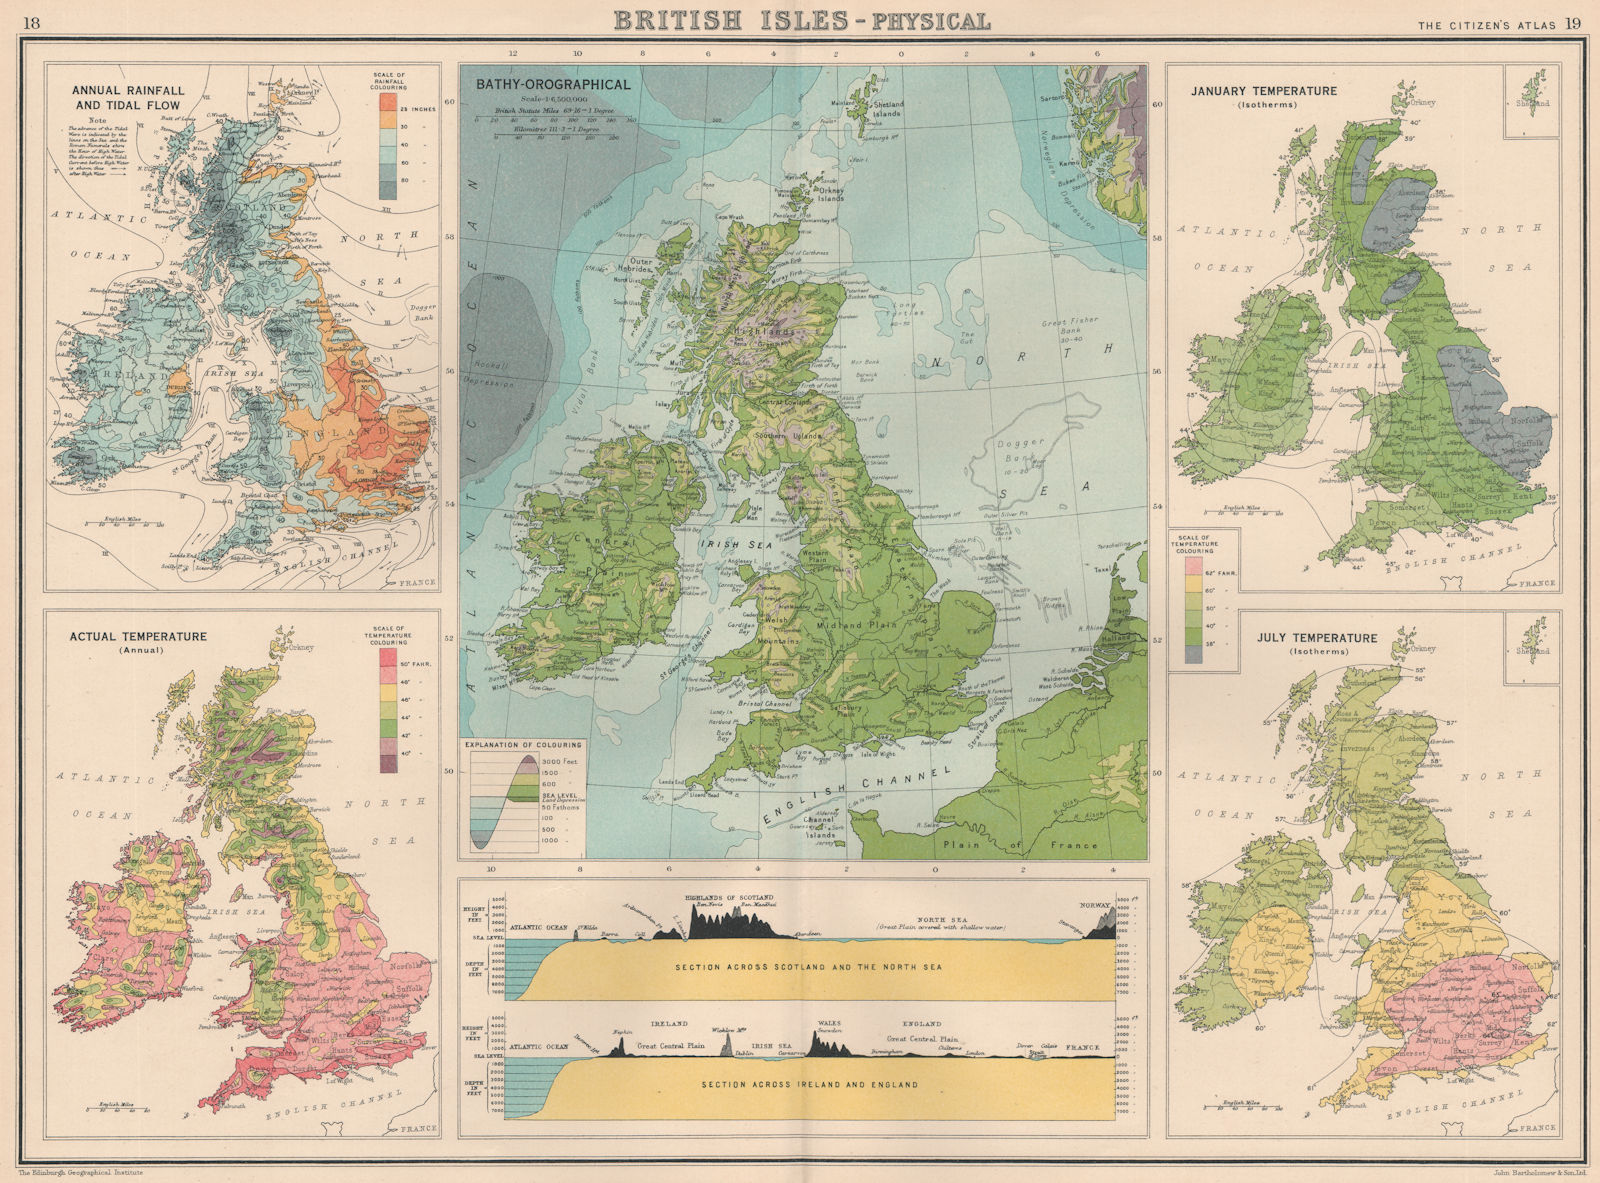 BRITISH ISLES PHYSICAL CLIMATE.Sections.Scotland/Norway,Ireland/England 1924 map